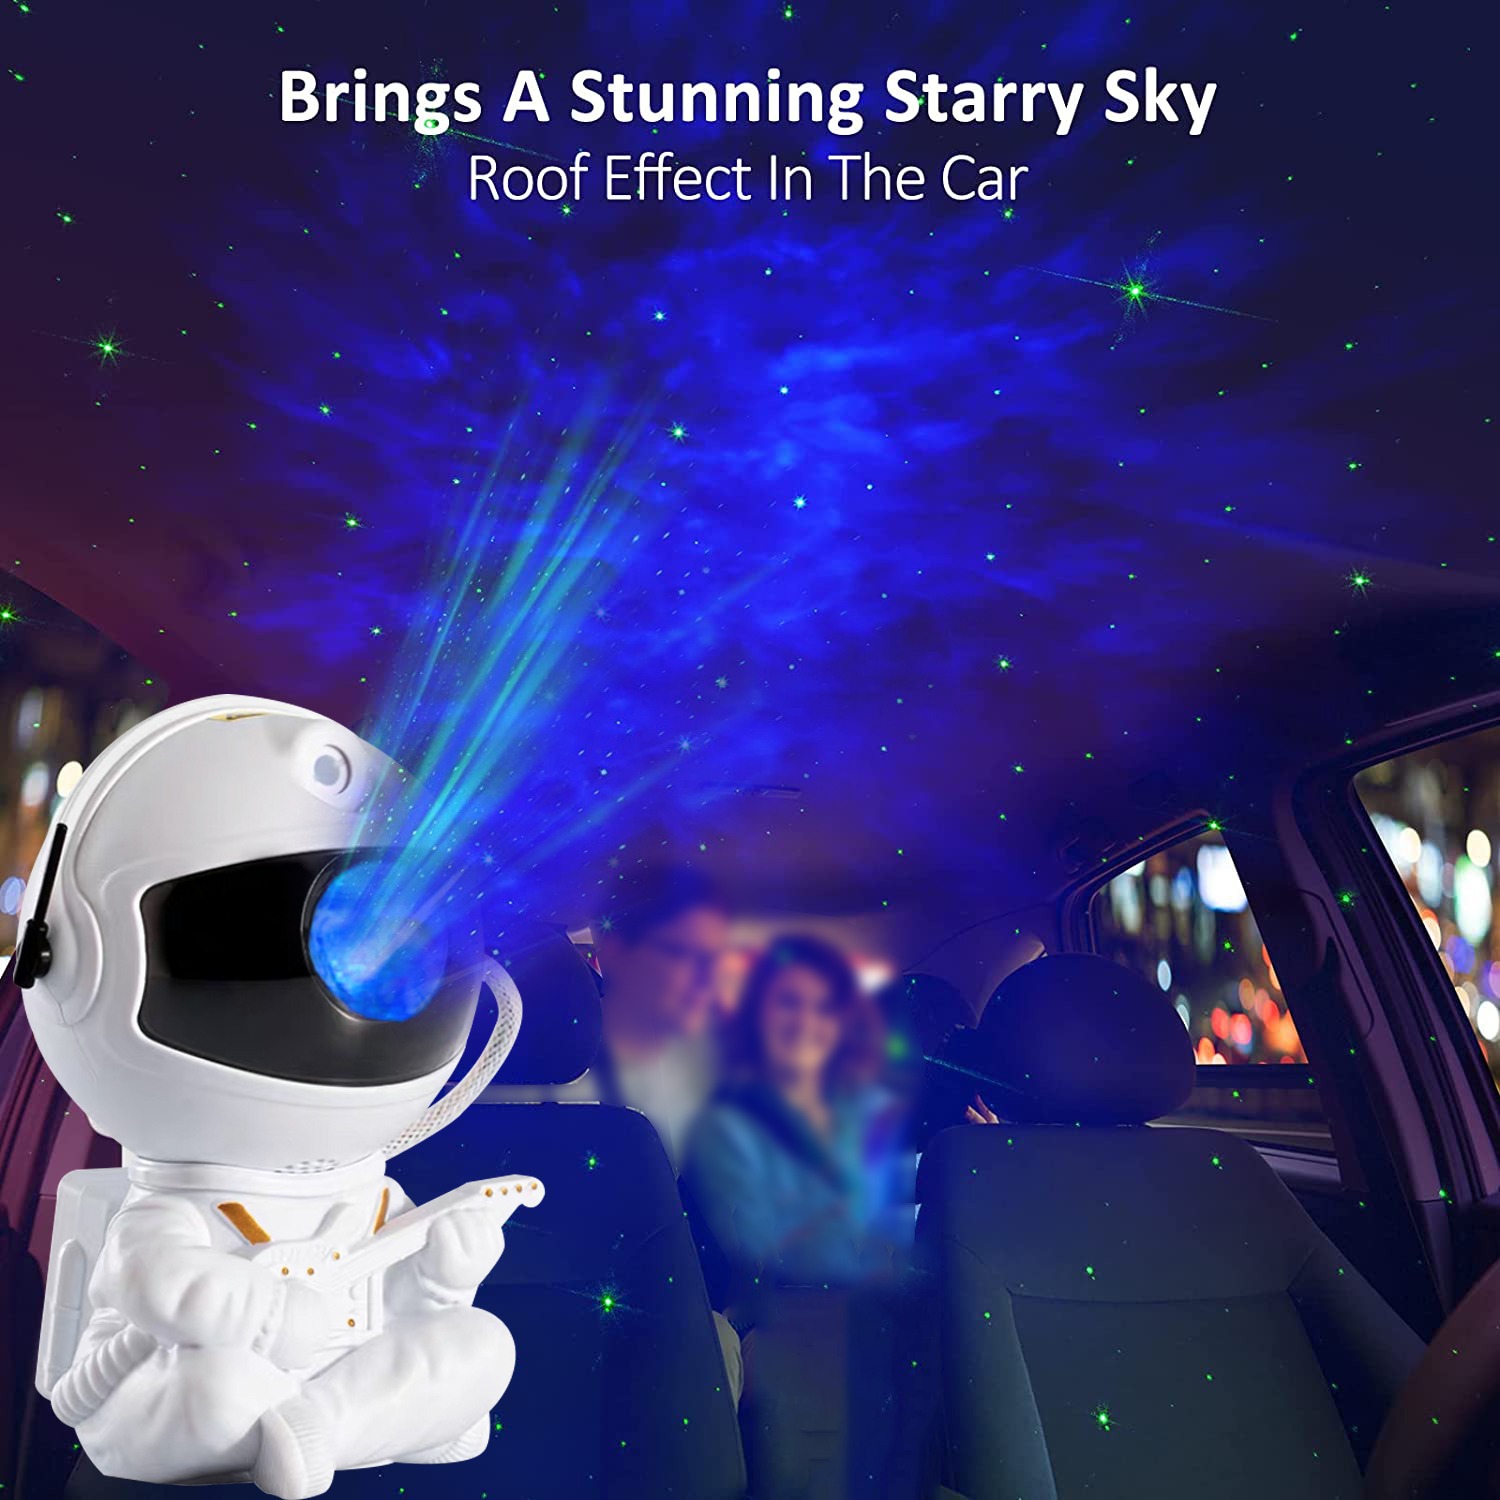 Seating Astronaut Galaxy Starry Projector Night Lamp